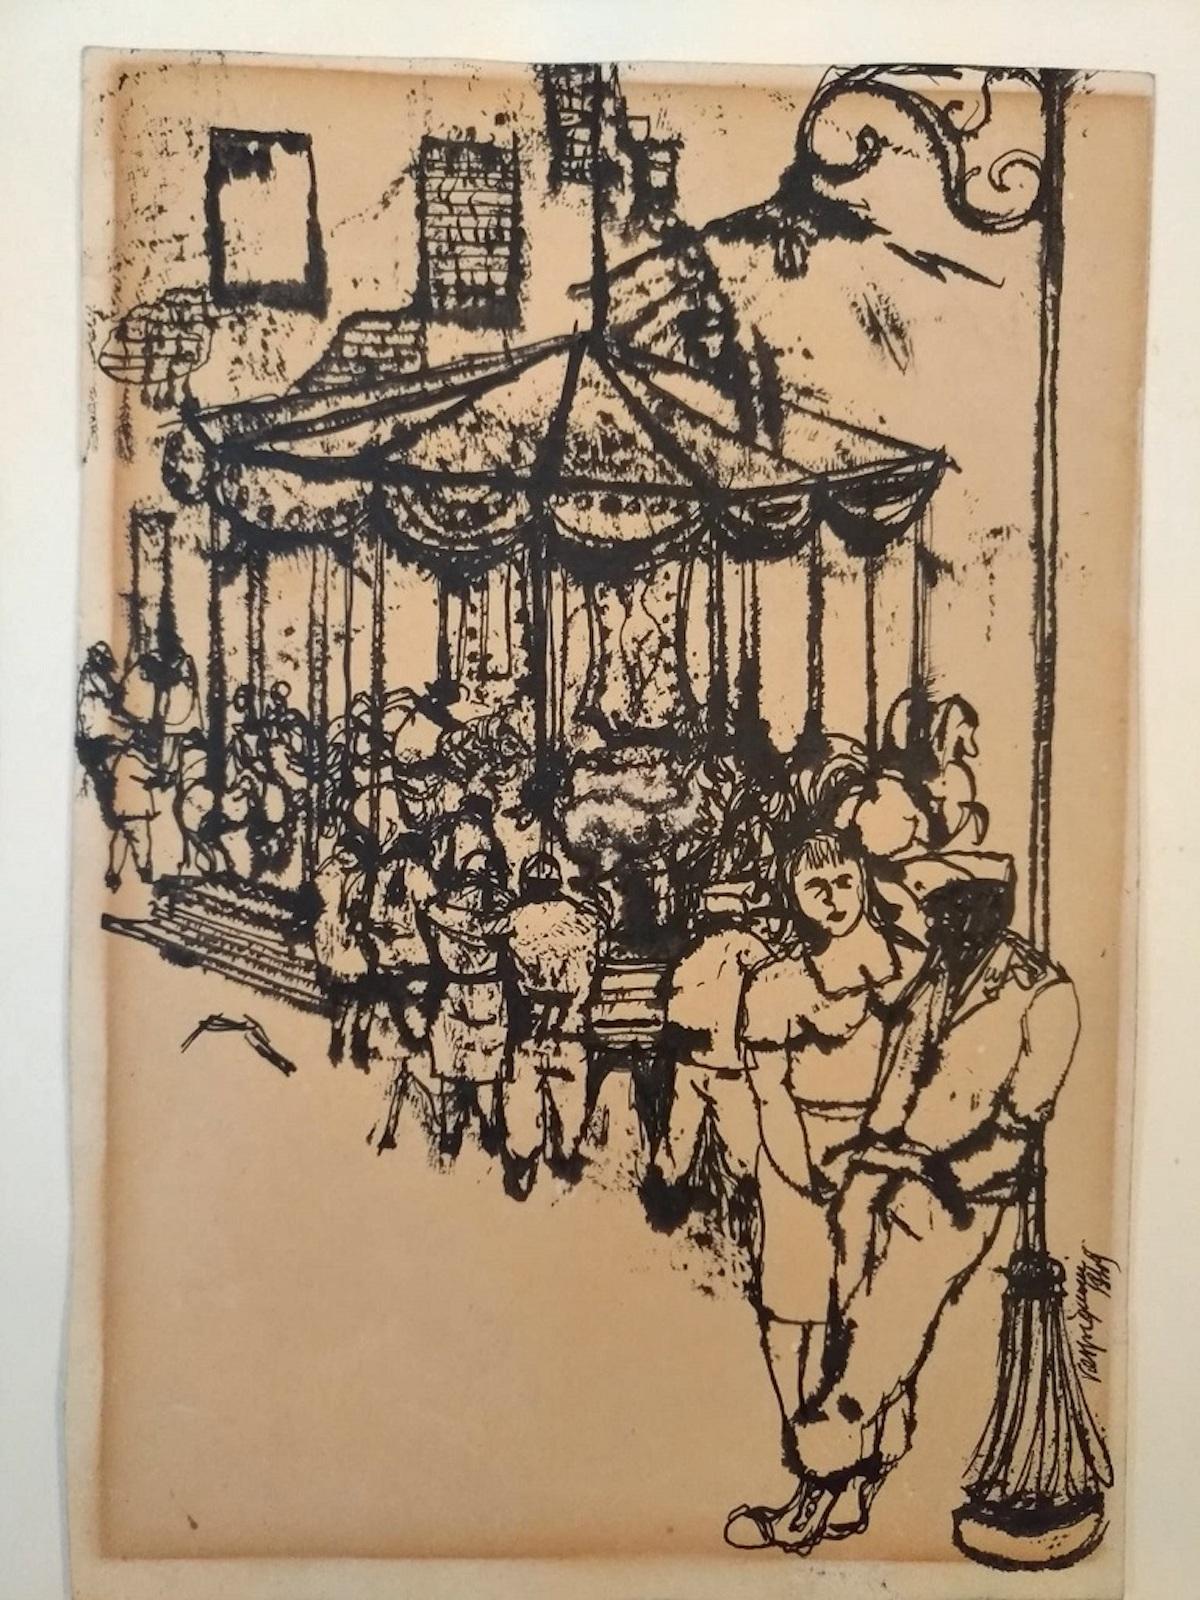 The Carousel - China Ink Drawing by Renzo Vespignani - 1949